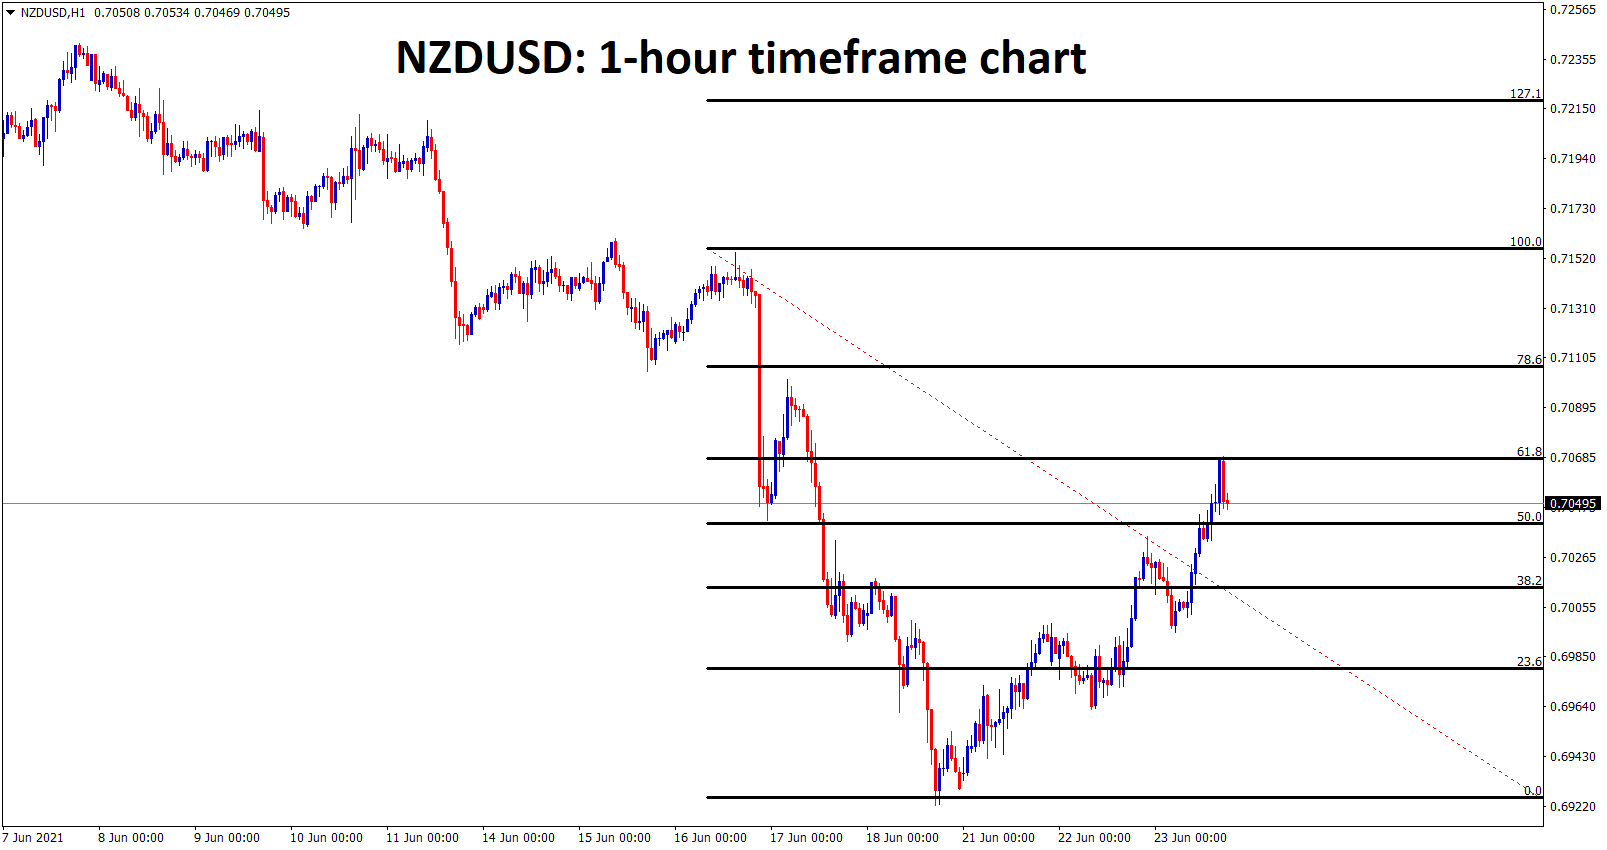 NZDUSD made a 61 correction from the last high